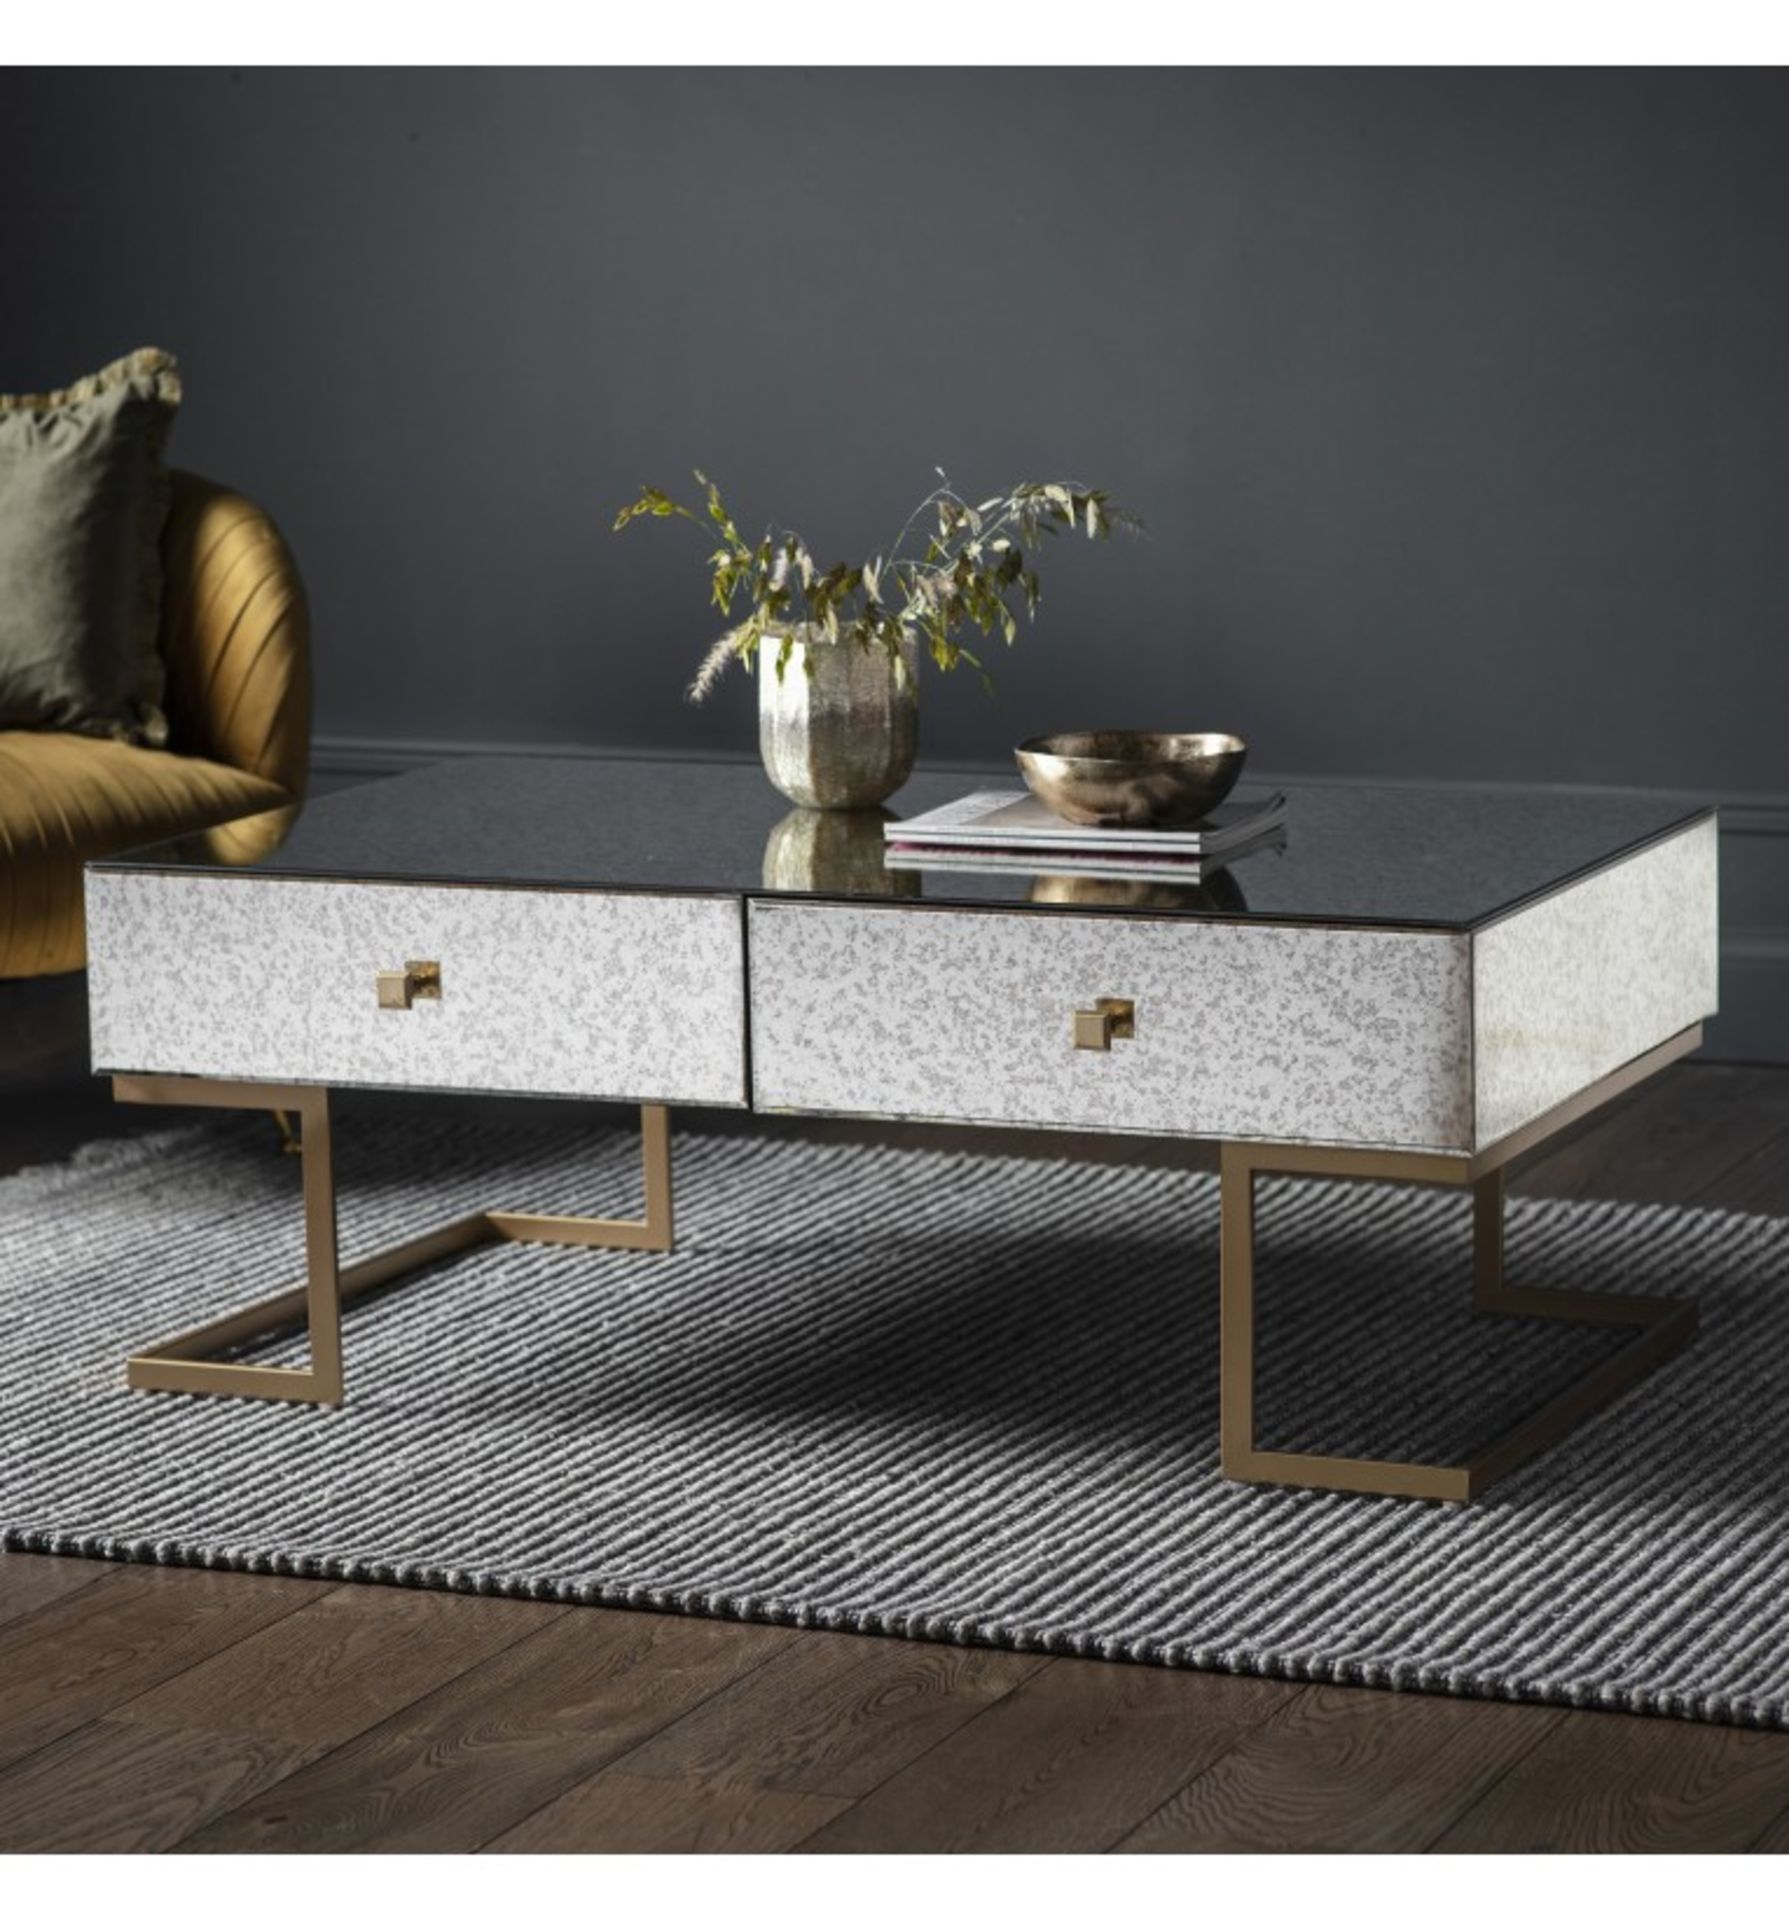 Amberley 4 Drawer Coffee Table Add A Touch Of Decadence And A Sophisticated Atmosphere To Your